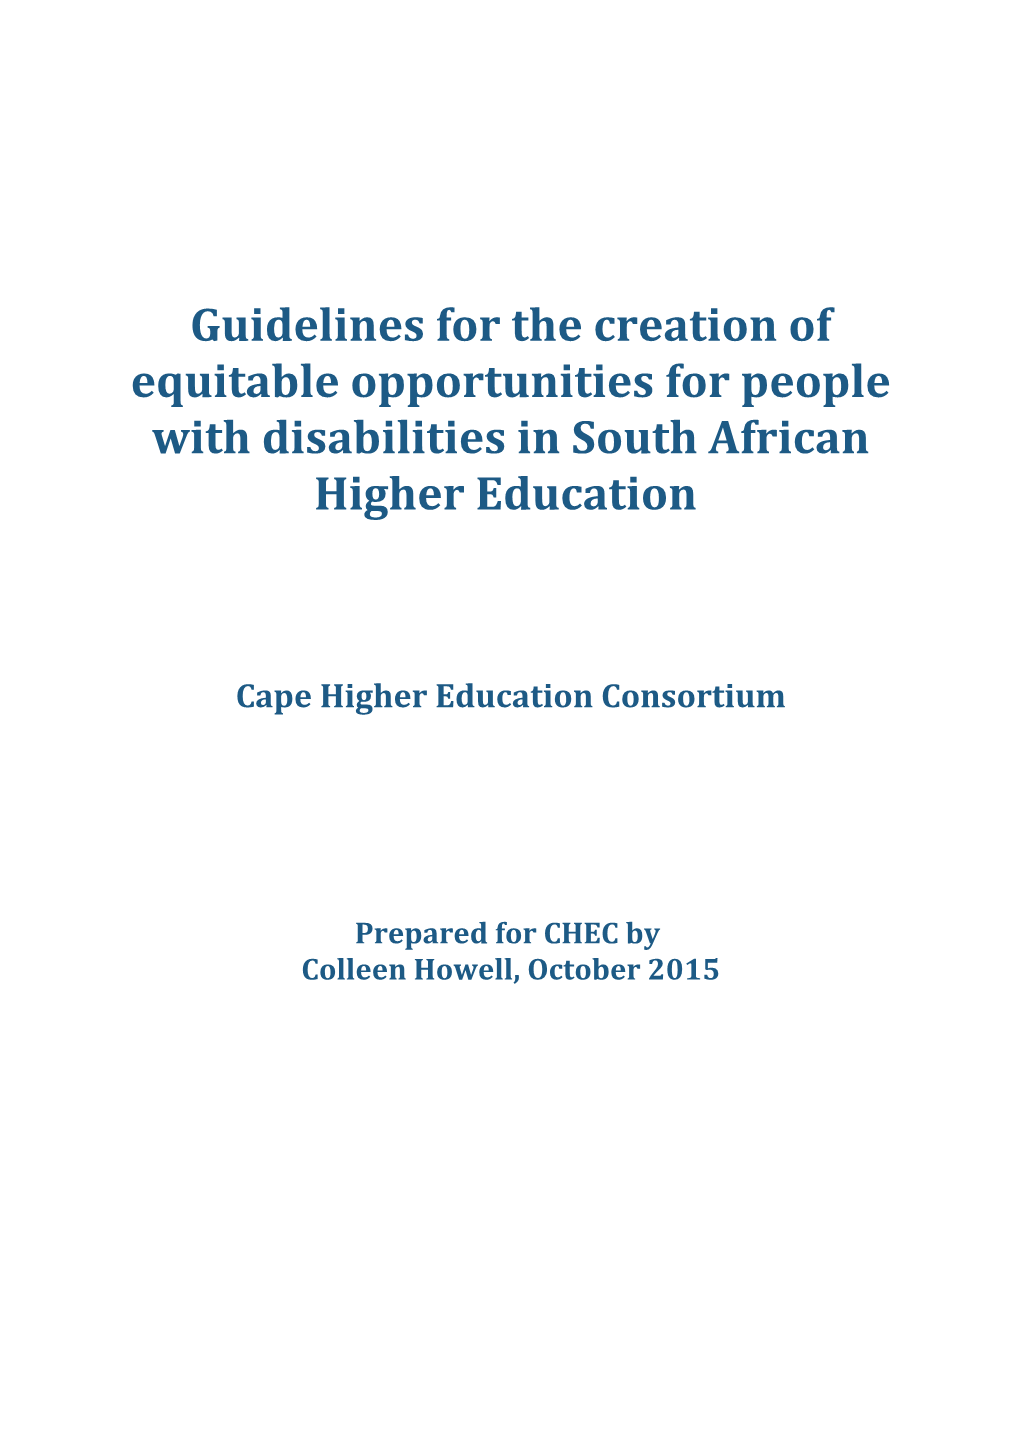 Guidelines for the Creation of Equitable Opportunities for People with Disabilities In